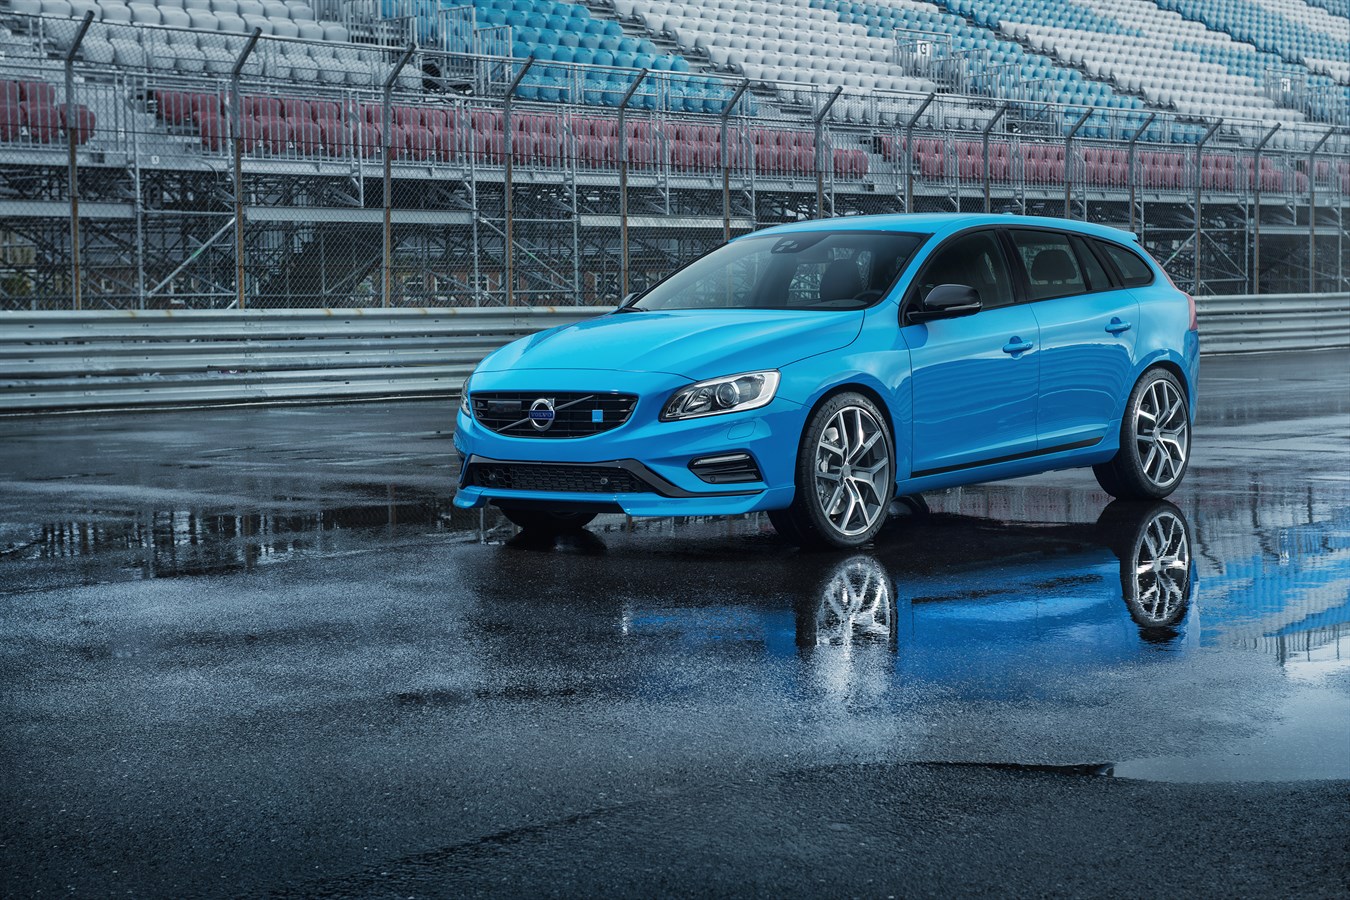 The new Volvo S60 and V60 Polestar are here: world debut for a new Volvo V60  engineered by Polestar - Volvo Cars Global Media Newsroom